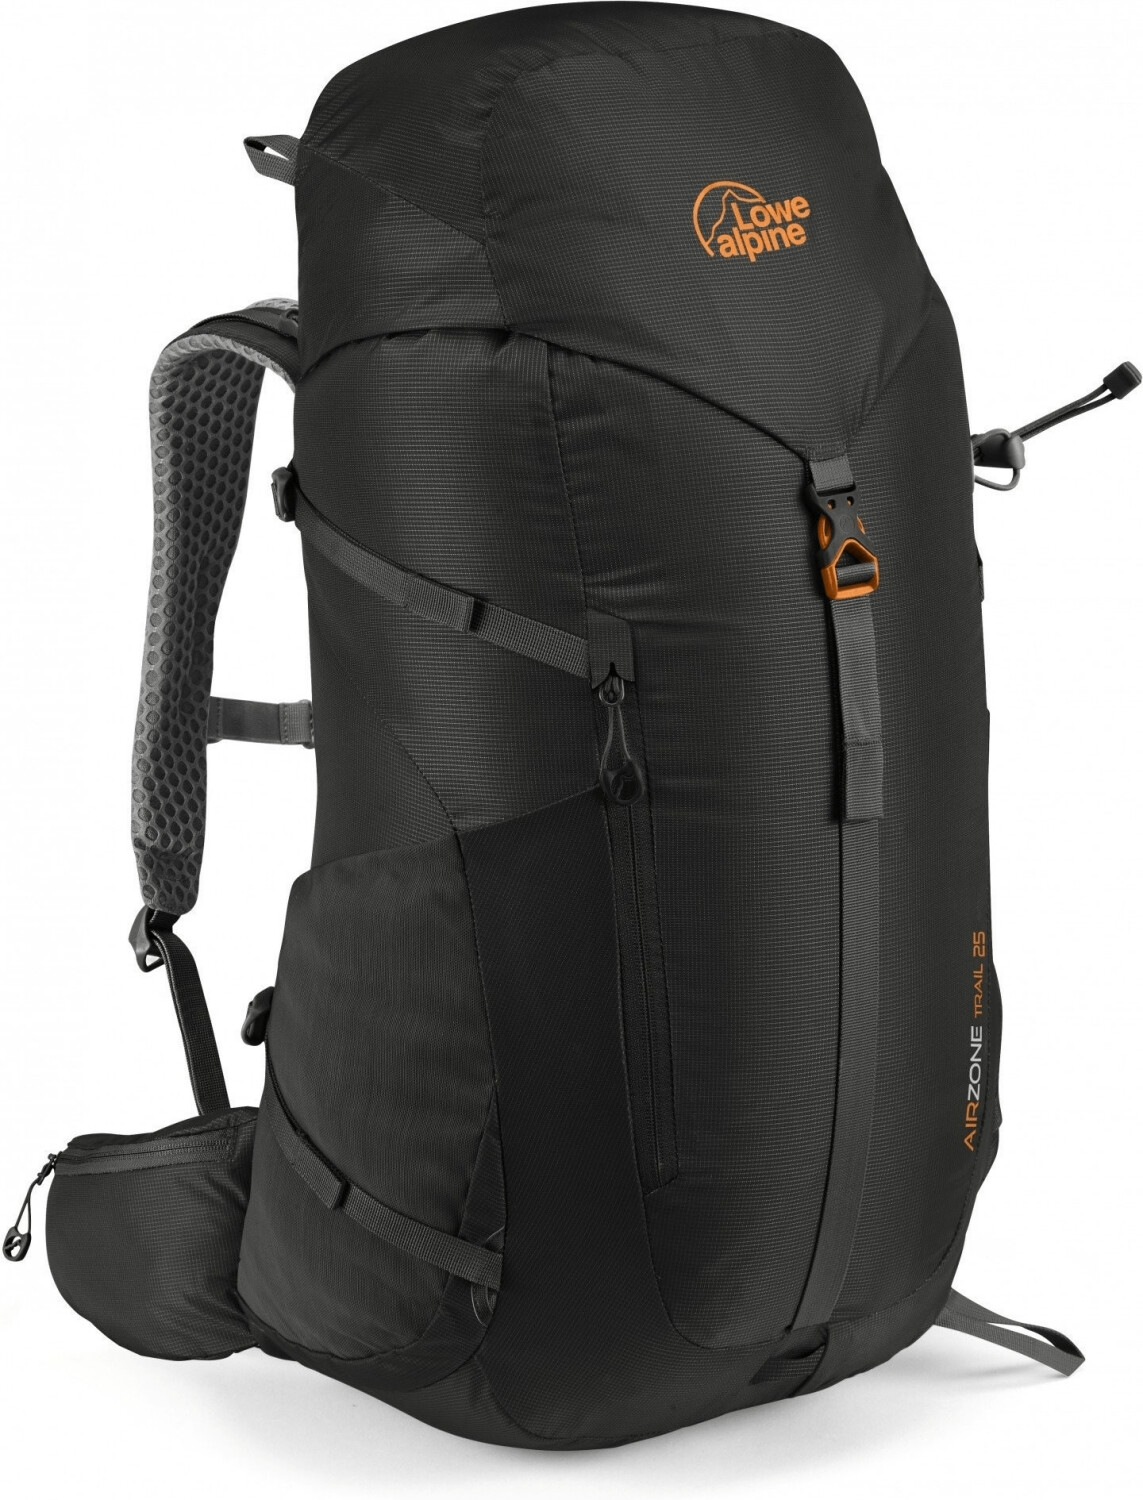 Lowe Alpine Airzone Trail 25 black - Where to Buy? Availability ...